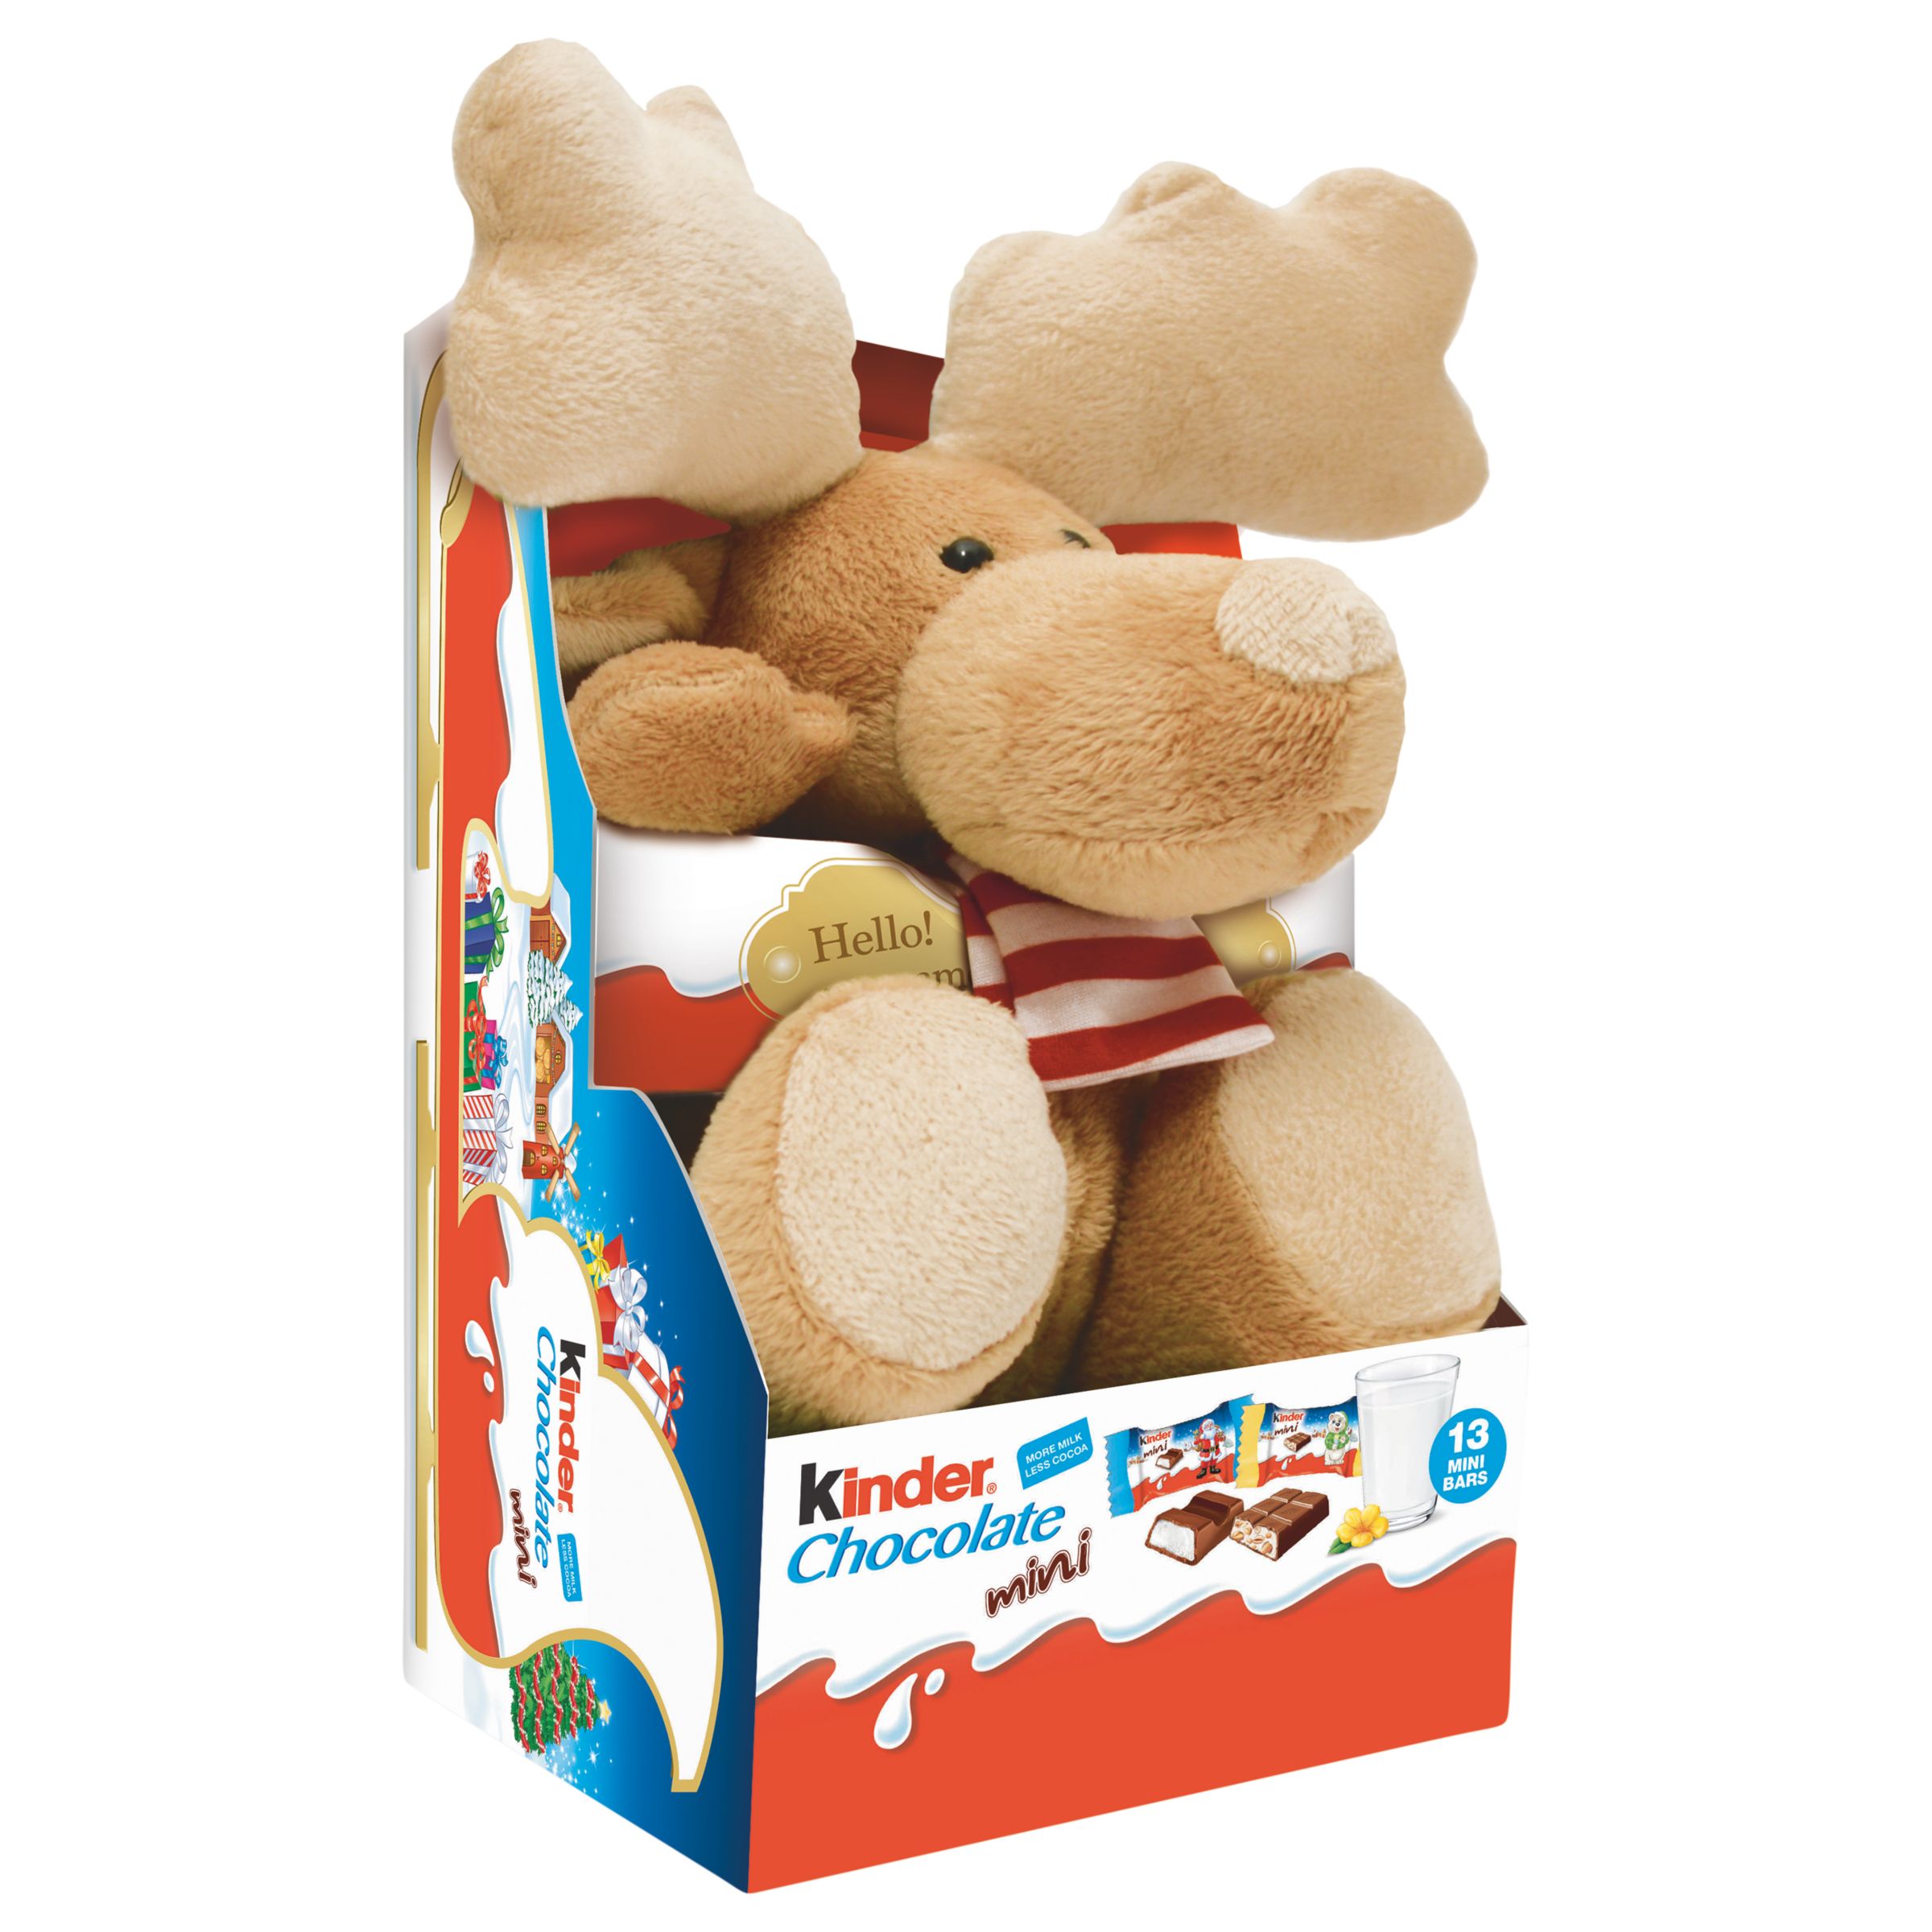 Kinder Fluffy Toy with Mini Chocolates, 73g at John Lewis & Partners